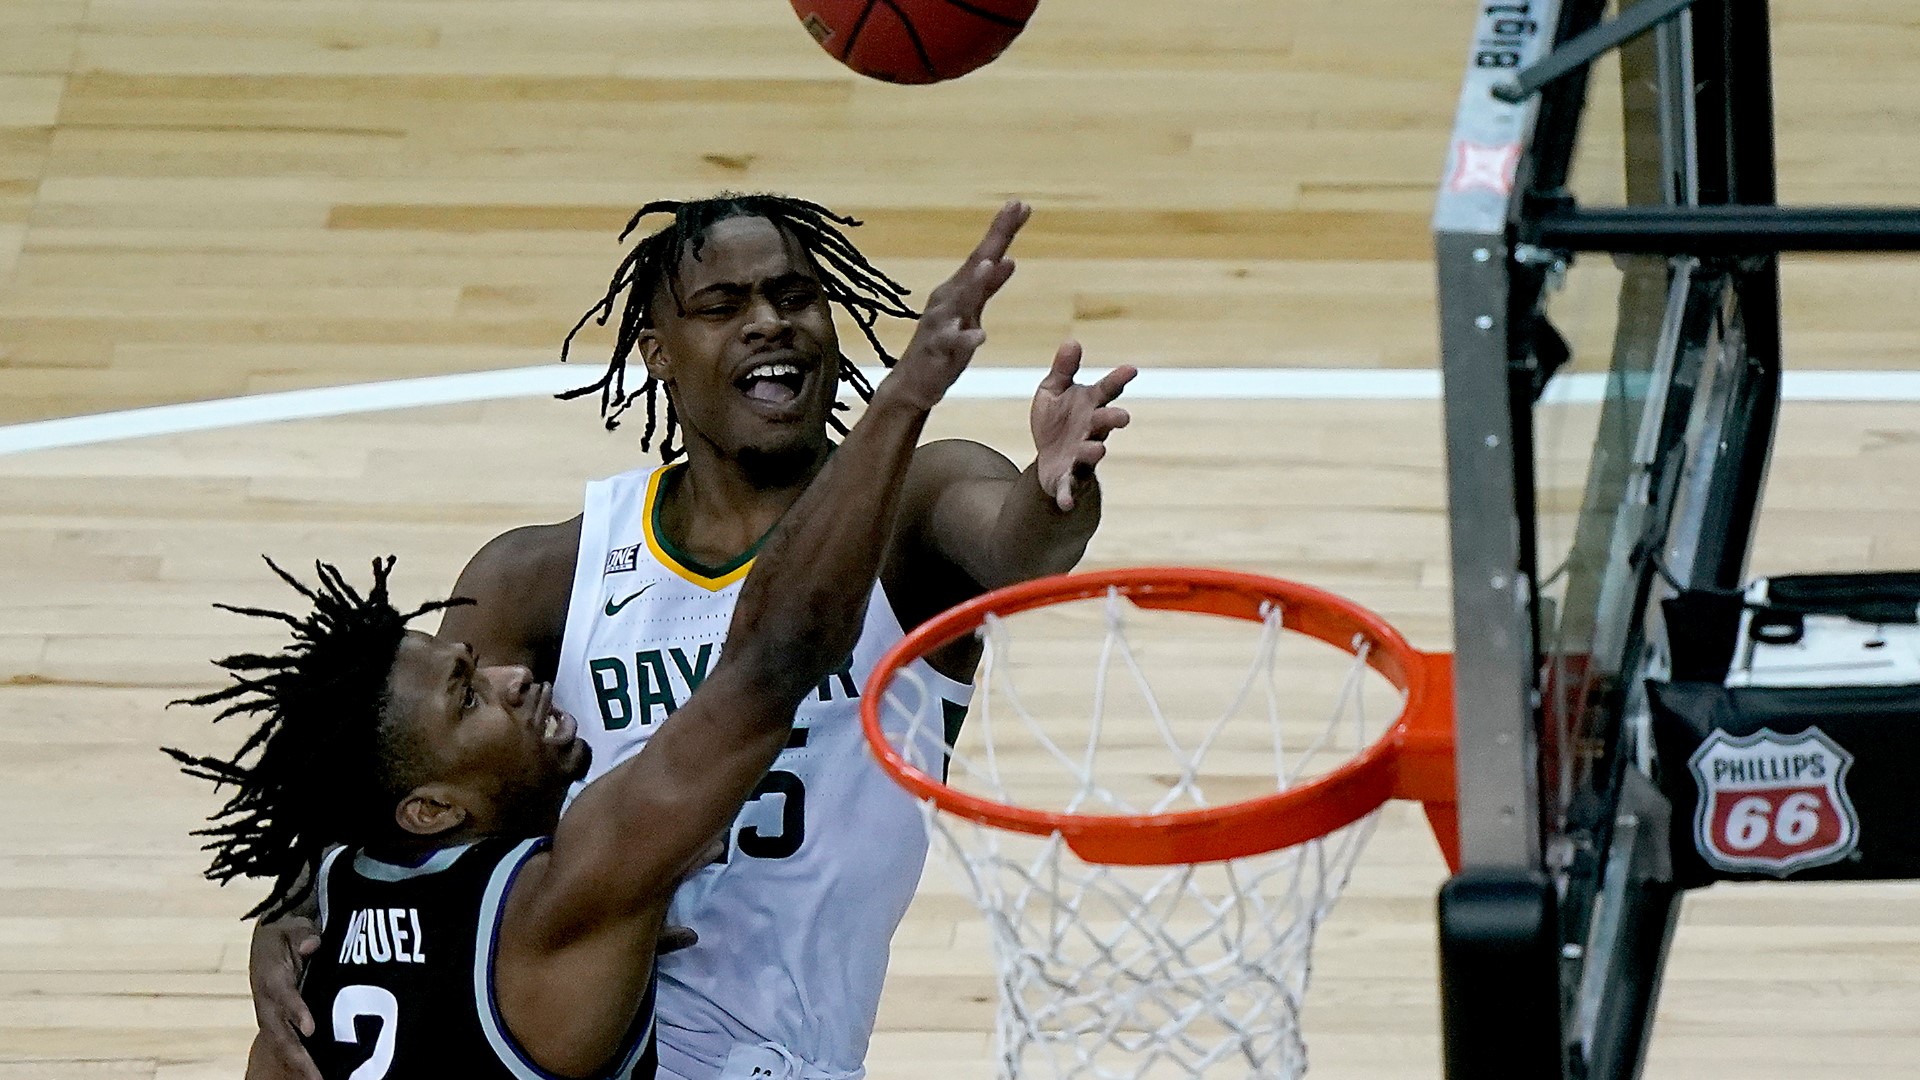 Baylor got its first win in the Big 12 Tournament since the 2016 quarterfinal.